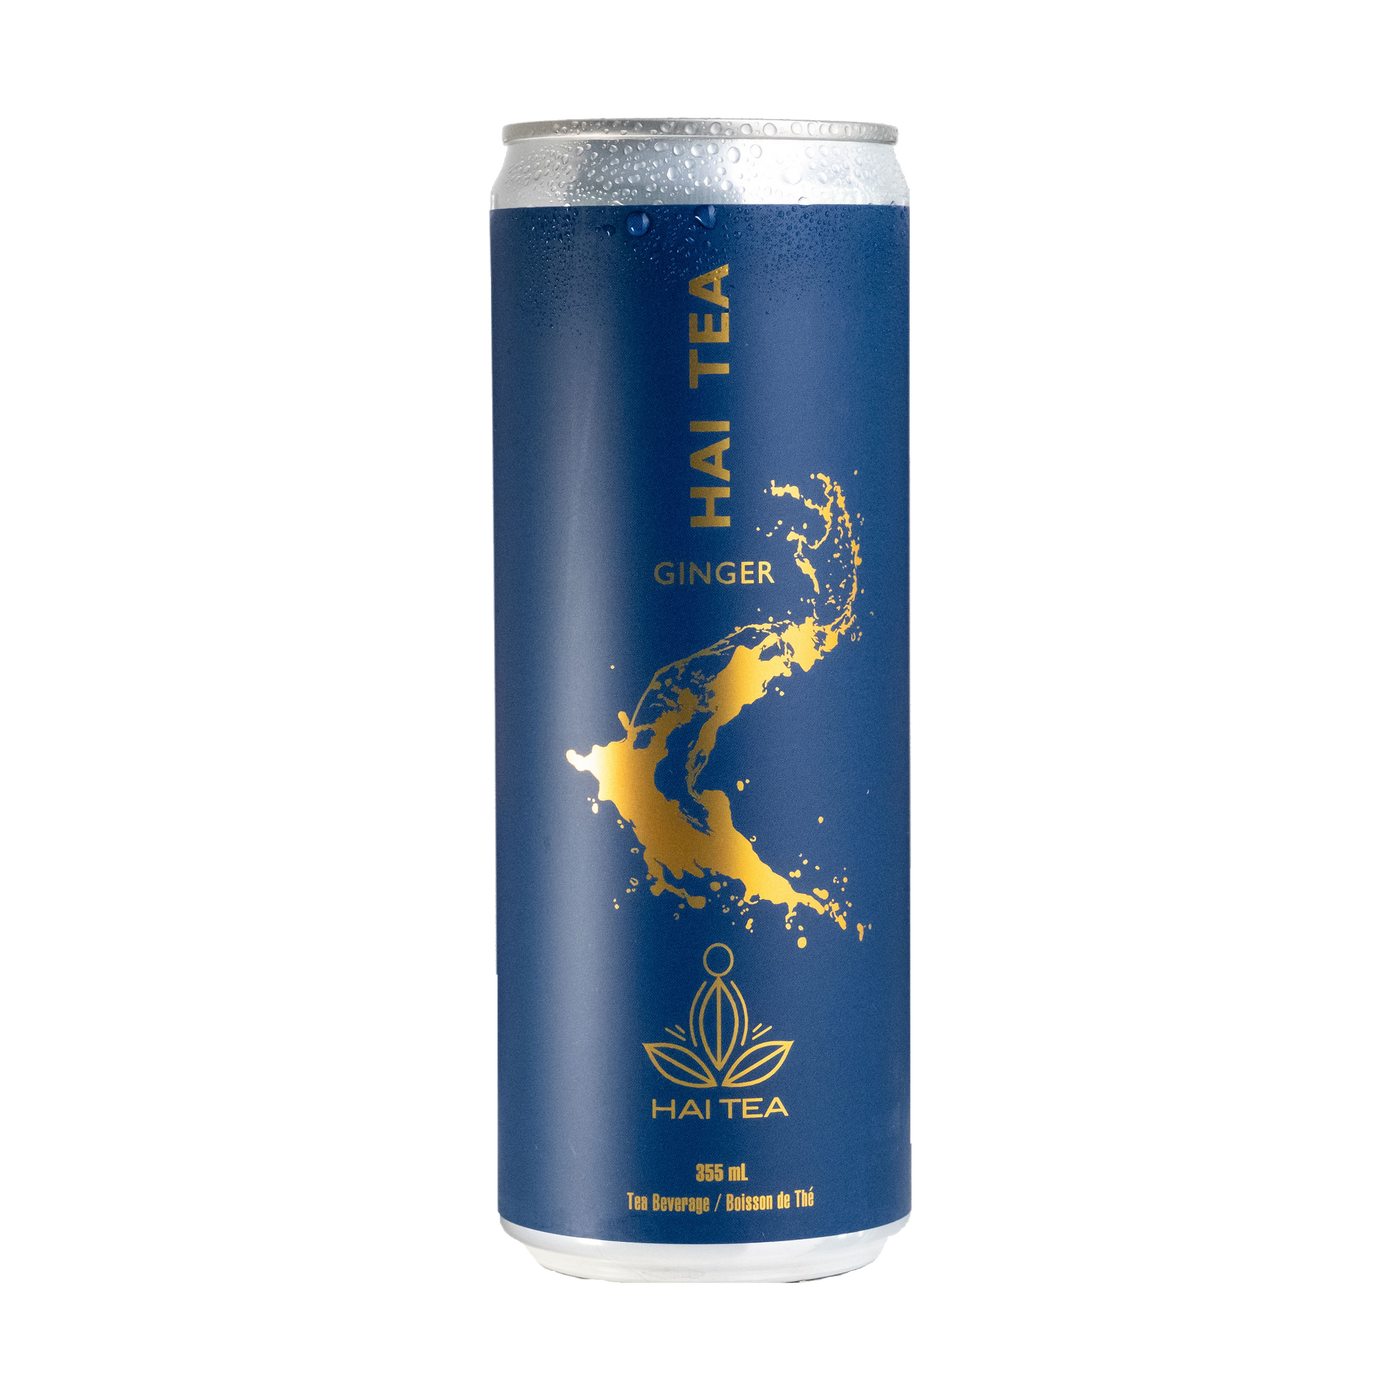 Hai Tea Ginger - Canada USA - non-alcoholic tea based beverage - fell good endorphins - zesty alcohol replacement healthy great tasting